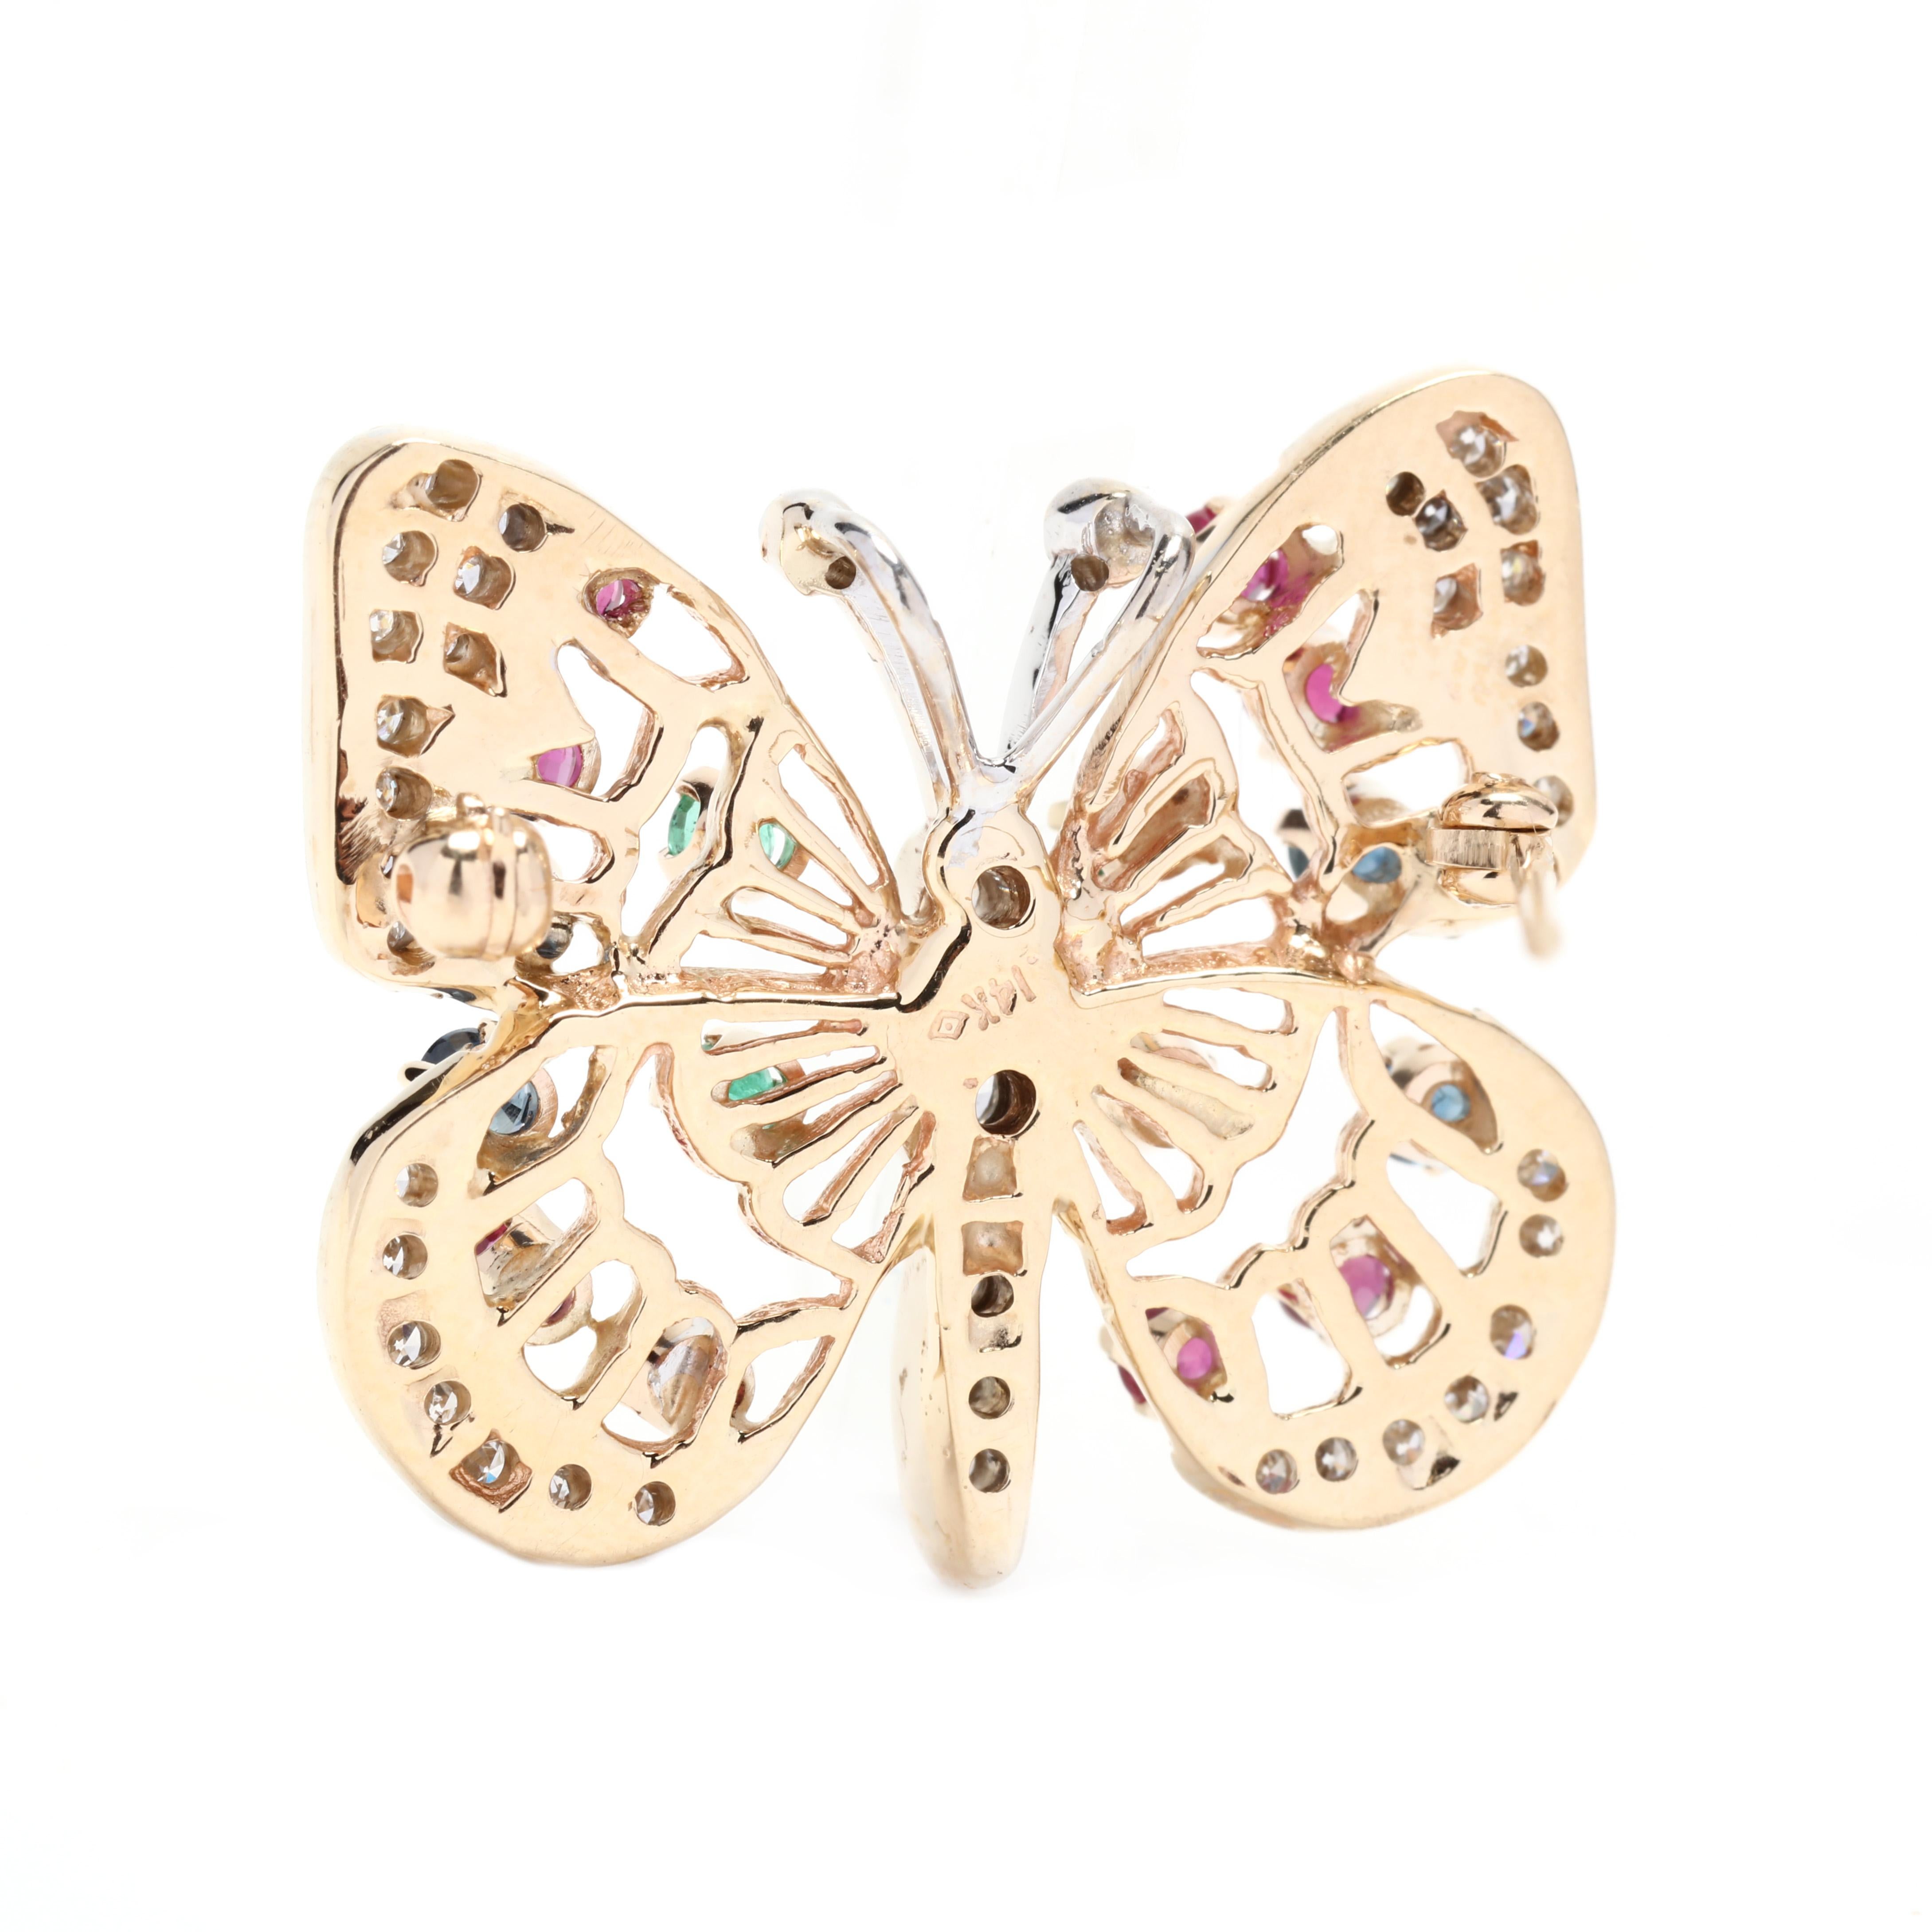 A vintage 14 karat yellow and white gold multi gem-set butterfly brooch. This brooch features a butterfly motif set with round cut sapphires weighing approximately .14 total carats, round cut rubies weighing approximately .40 total carats, round cut